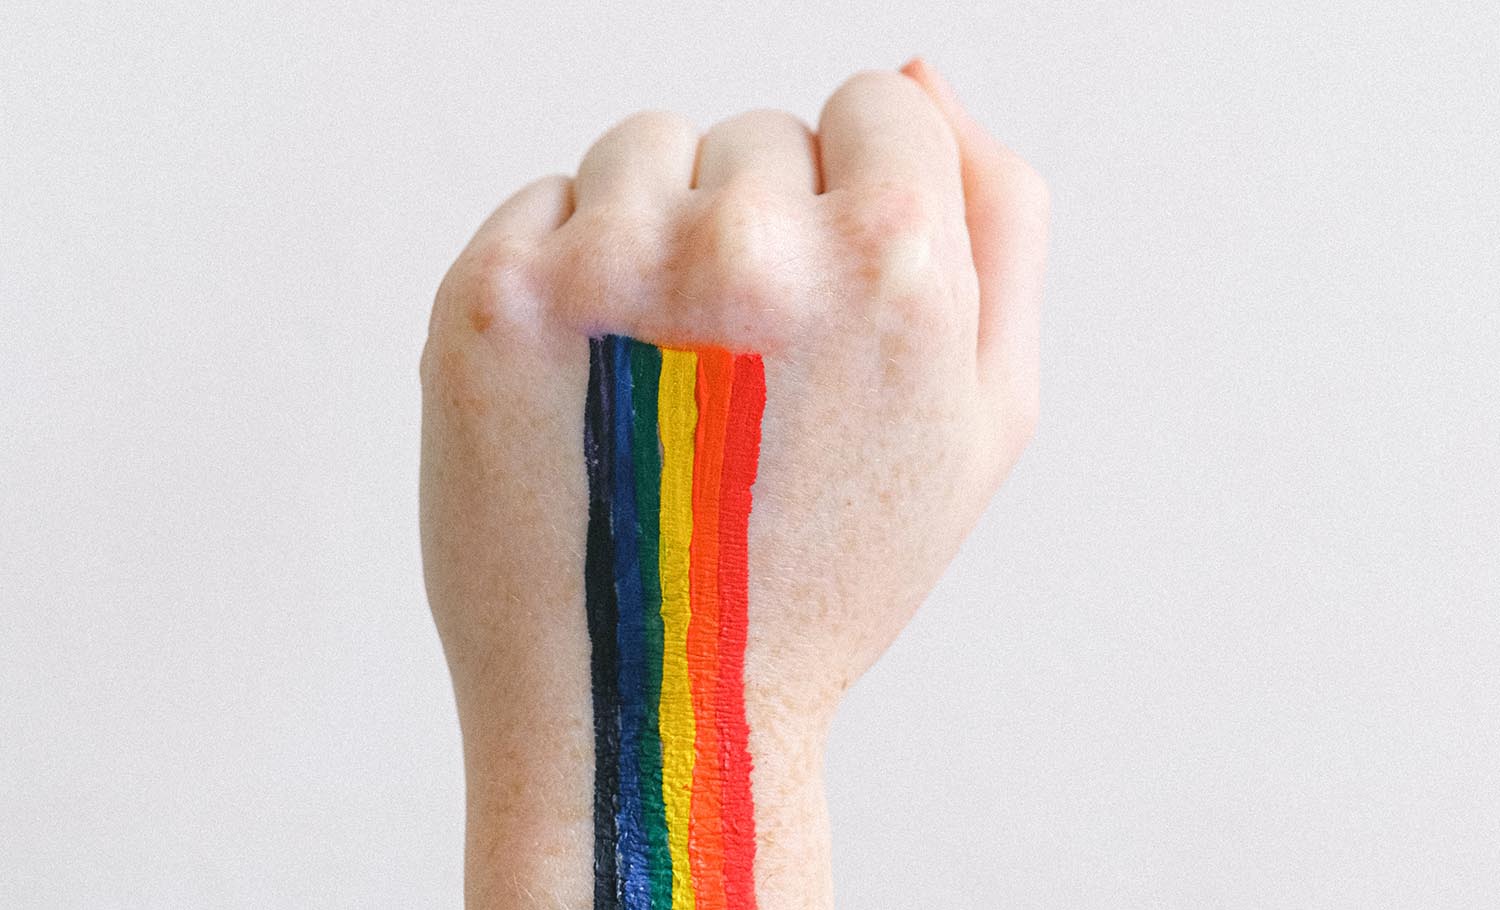 Taking Pride: A new look at reducing substance use disorders within the LGBTQ+ community